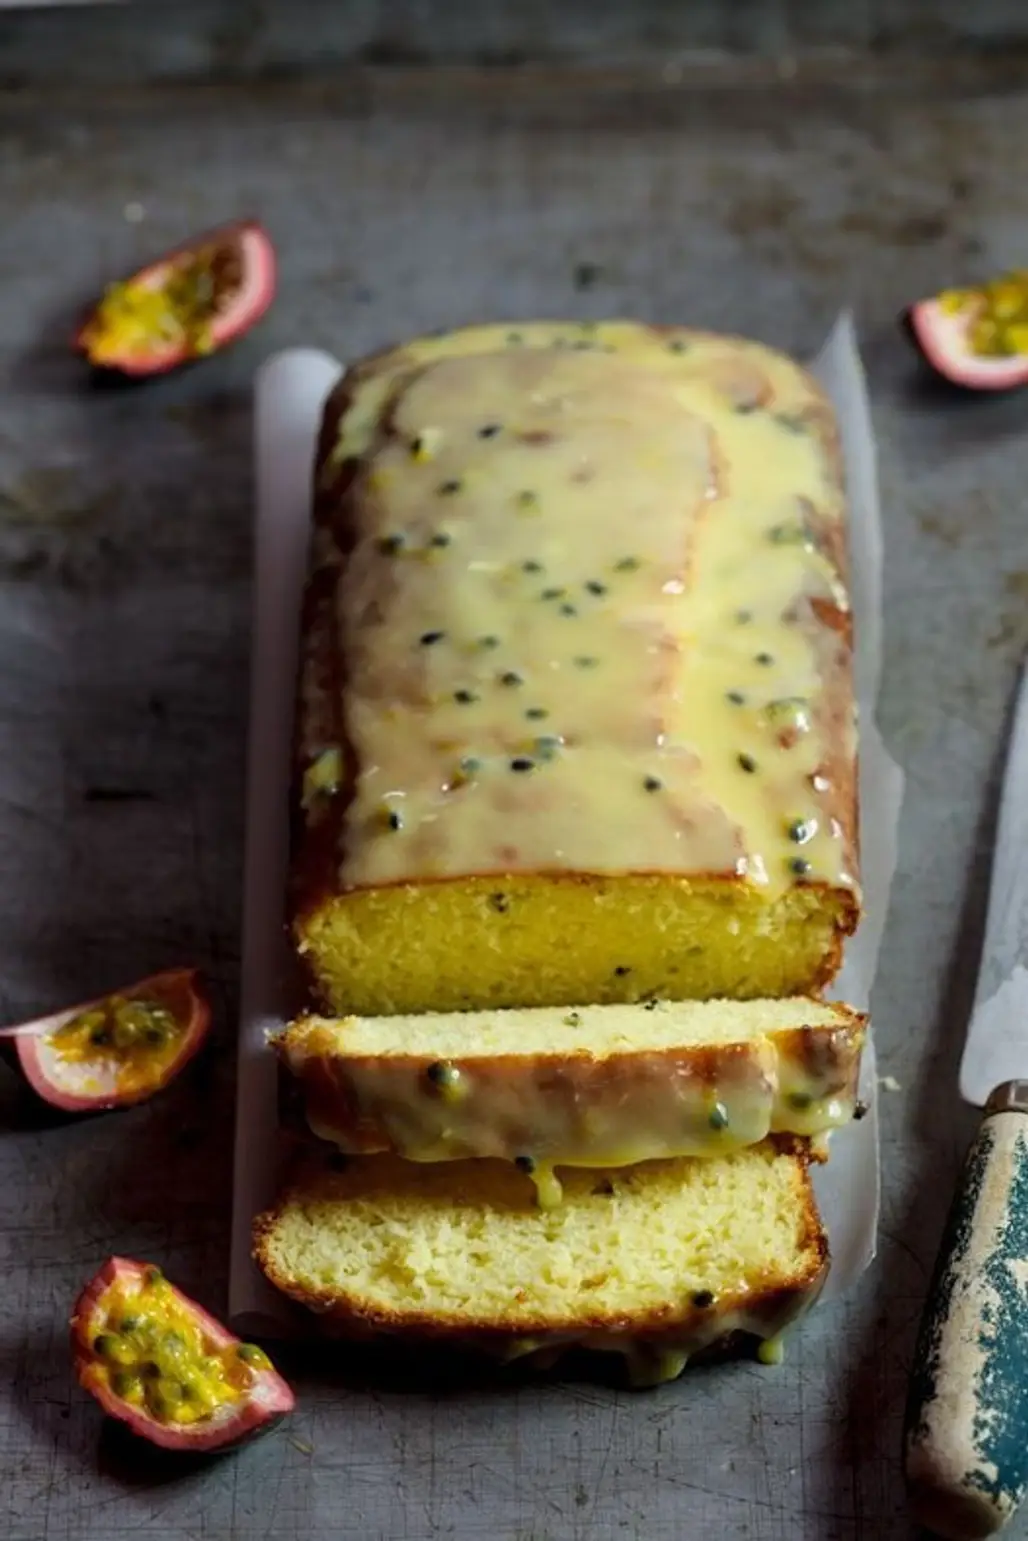 Passion Fruit Yoghurt Cake with White Chocolate Drizzle